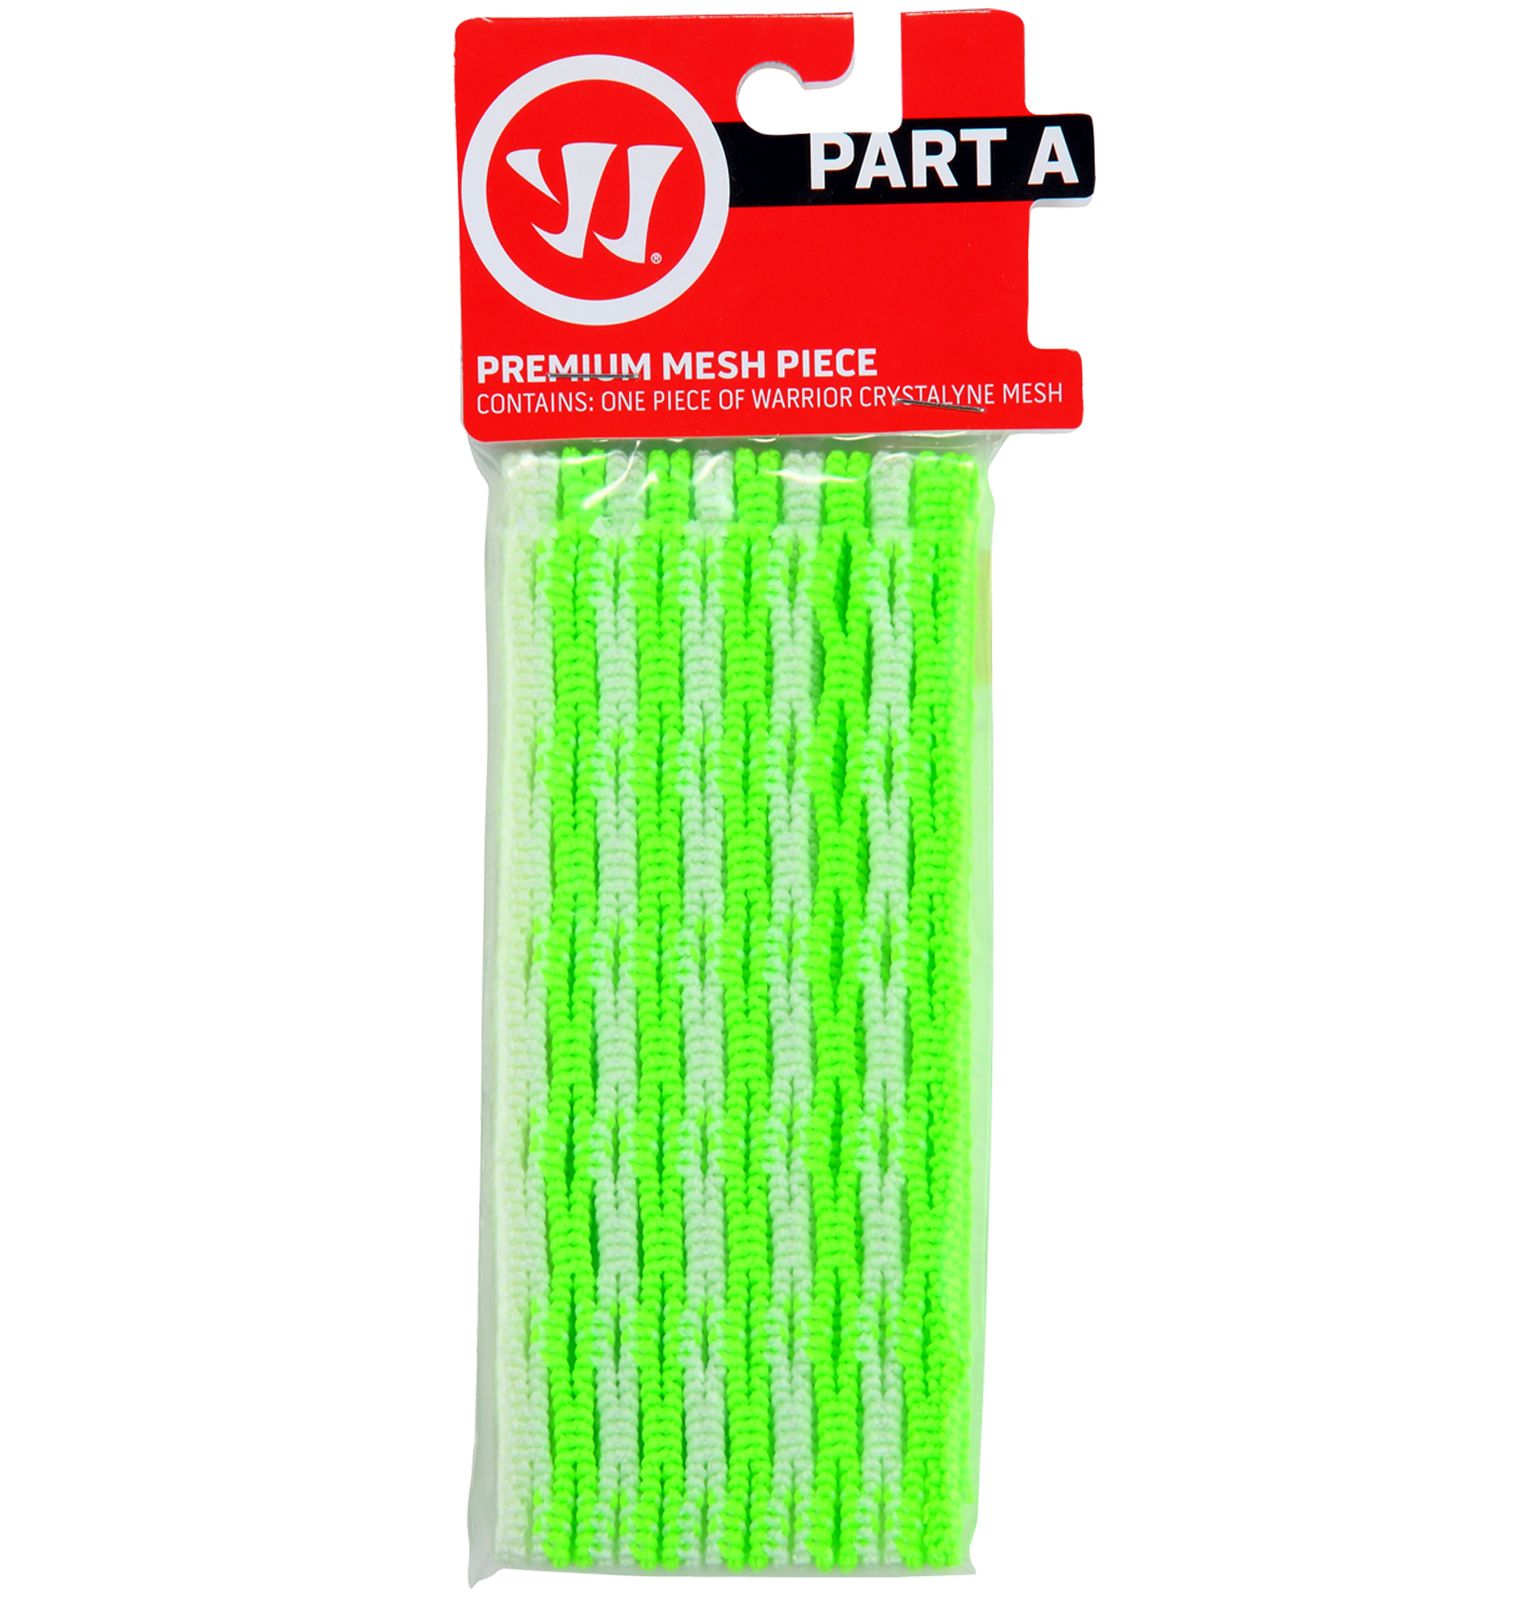 Crystalline mesh, Neon Green with White image number 0